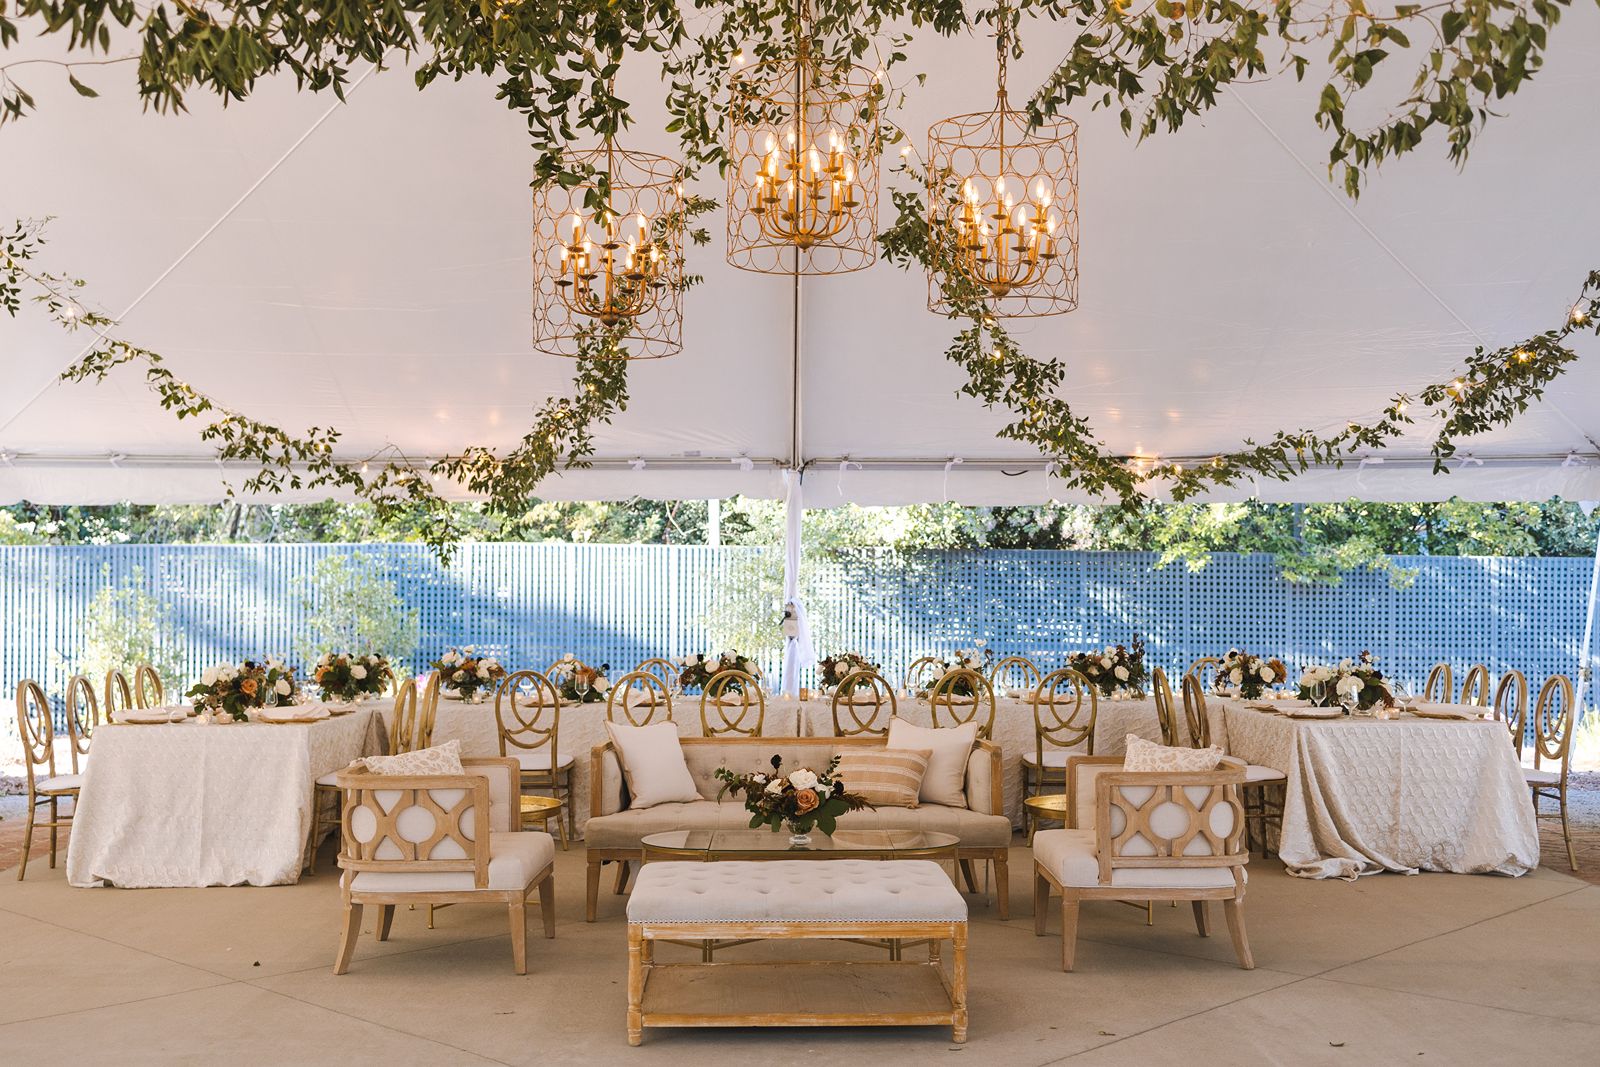 Tented wedding reception with greenery, chandeliers, and lounge.